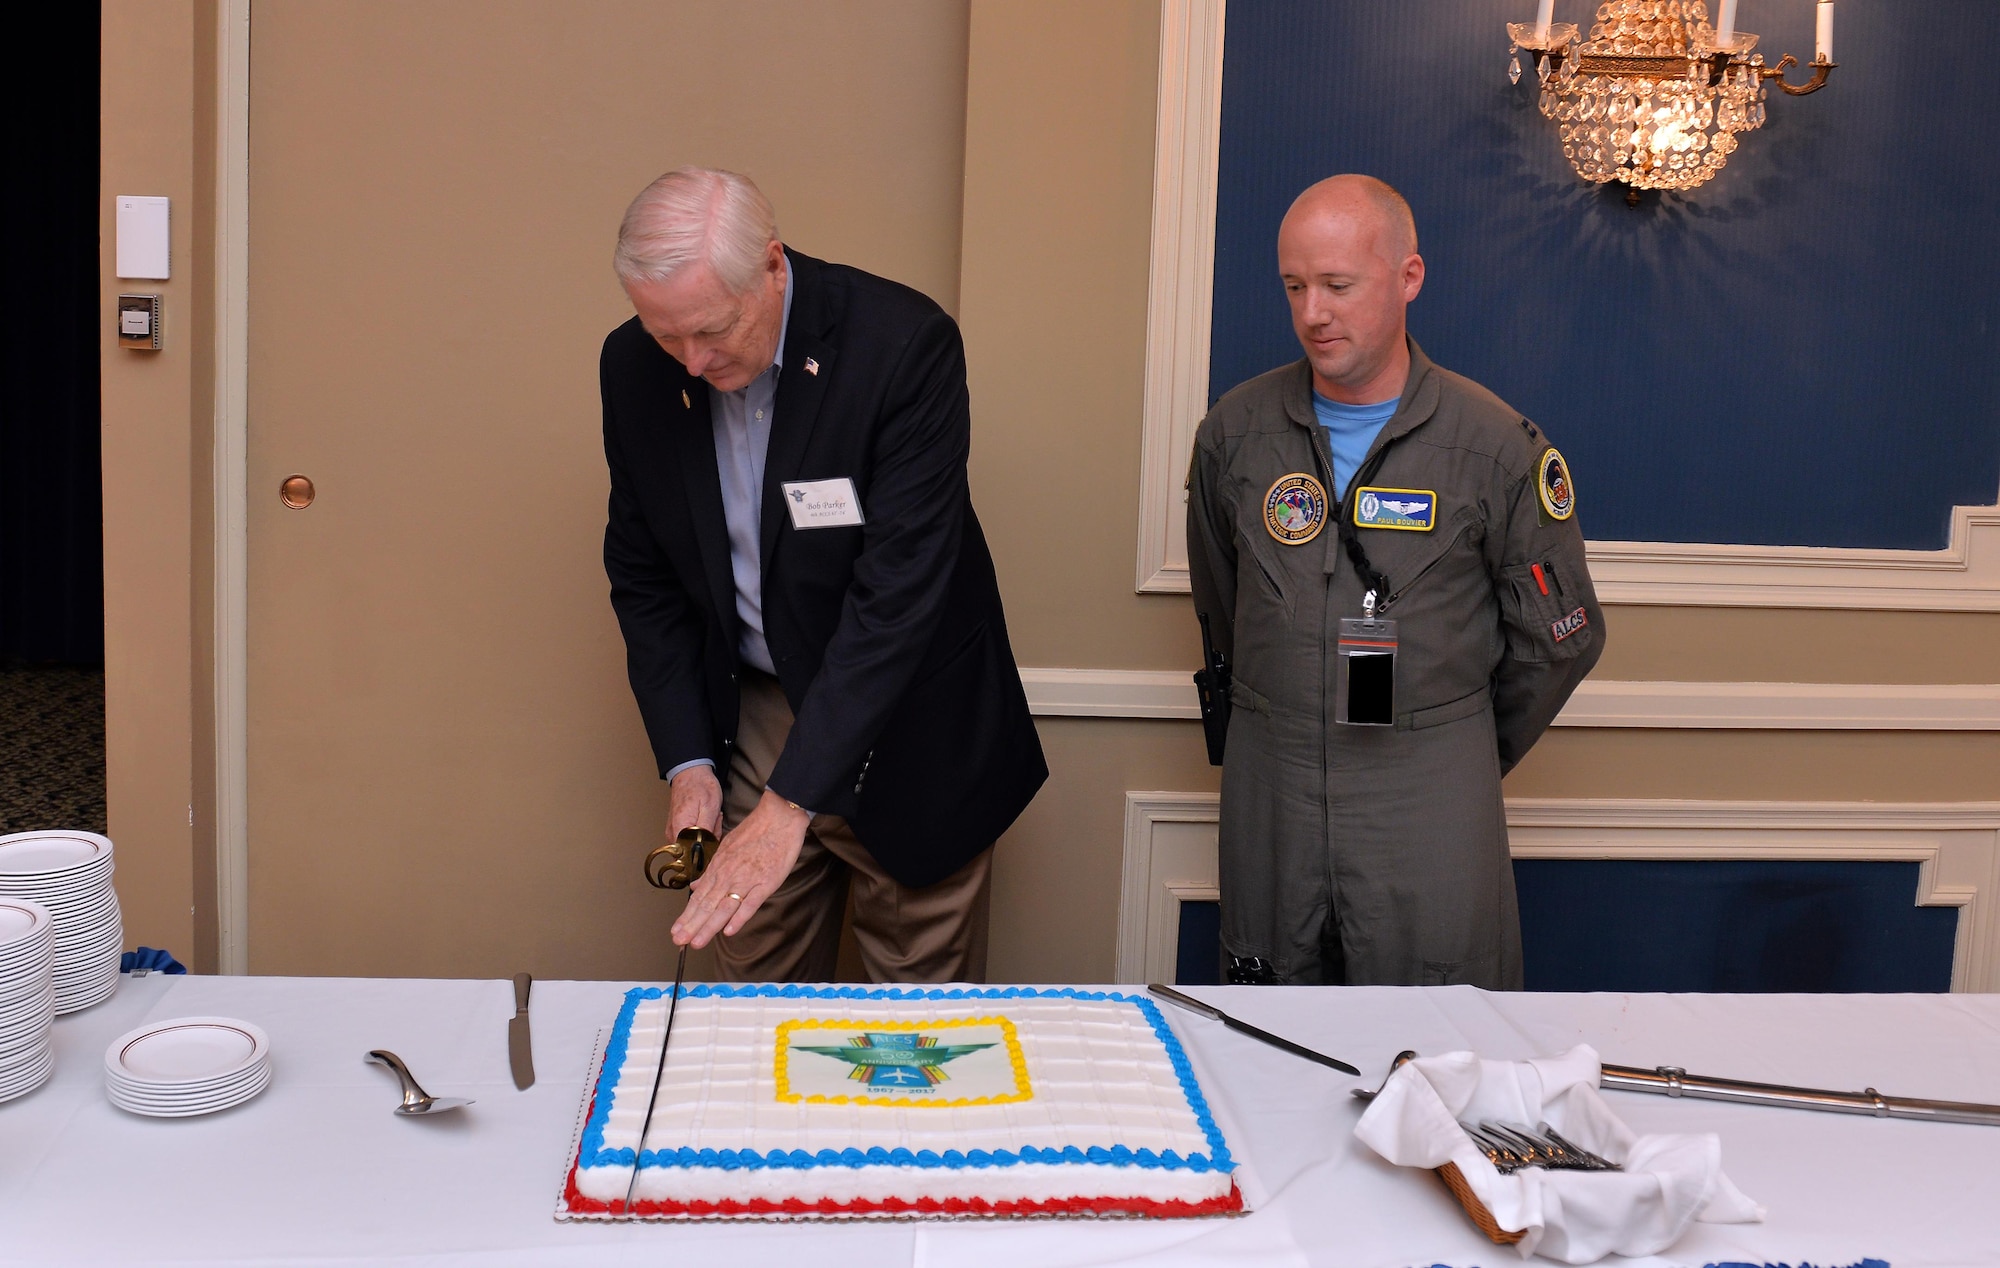 Retired Maj. Gen. Robert Parker, the first commander to lead the Airborne Launch Control System in 1967, ceremoniously cuts the anniversary cake with a saber alongside Capt. Paul Bouvier, a missileer assigned to the 625th Strategic Operations Squadron, at the 50th Anniversary celebration held June 2. the Patriot Club, Offutt Air Force Base, Neb. Over 80 Airmen both active duty and retired attended the event to celebrate the 50th anniversary of the Airborne Launch Control System. (U.S. Air Force photo by Josh Plueger)